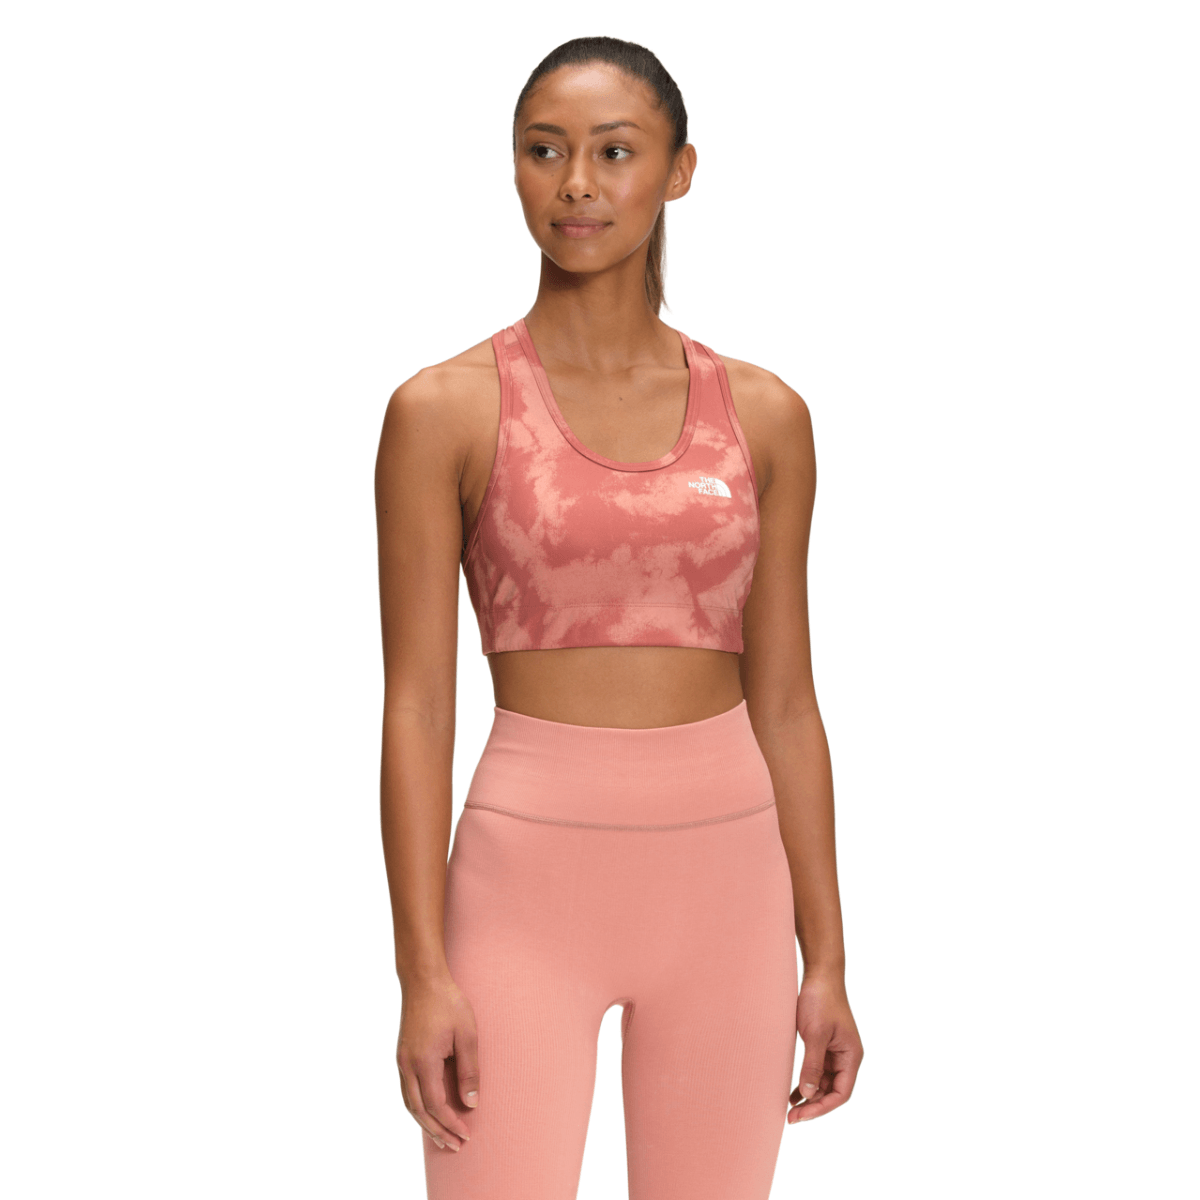 The North Face Printed Midline Bra - Women's 